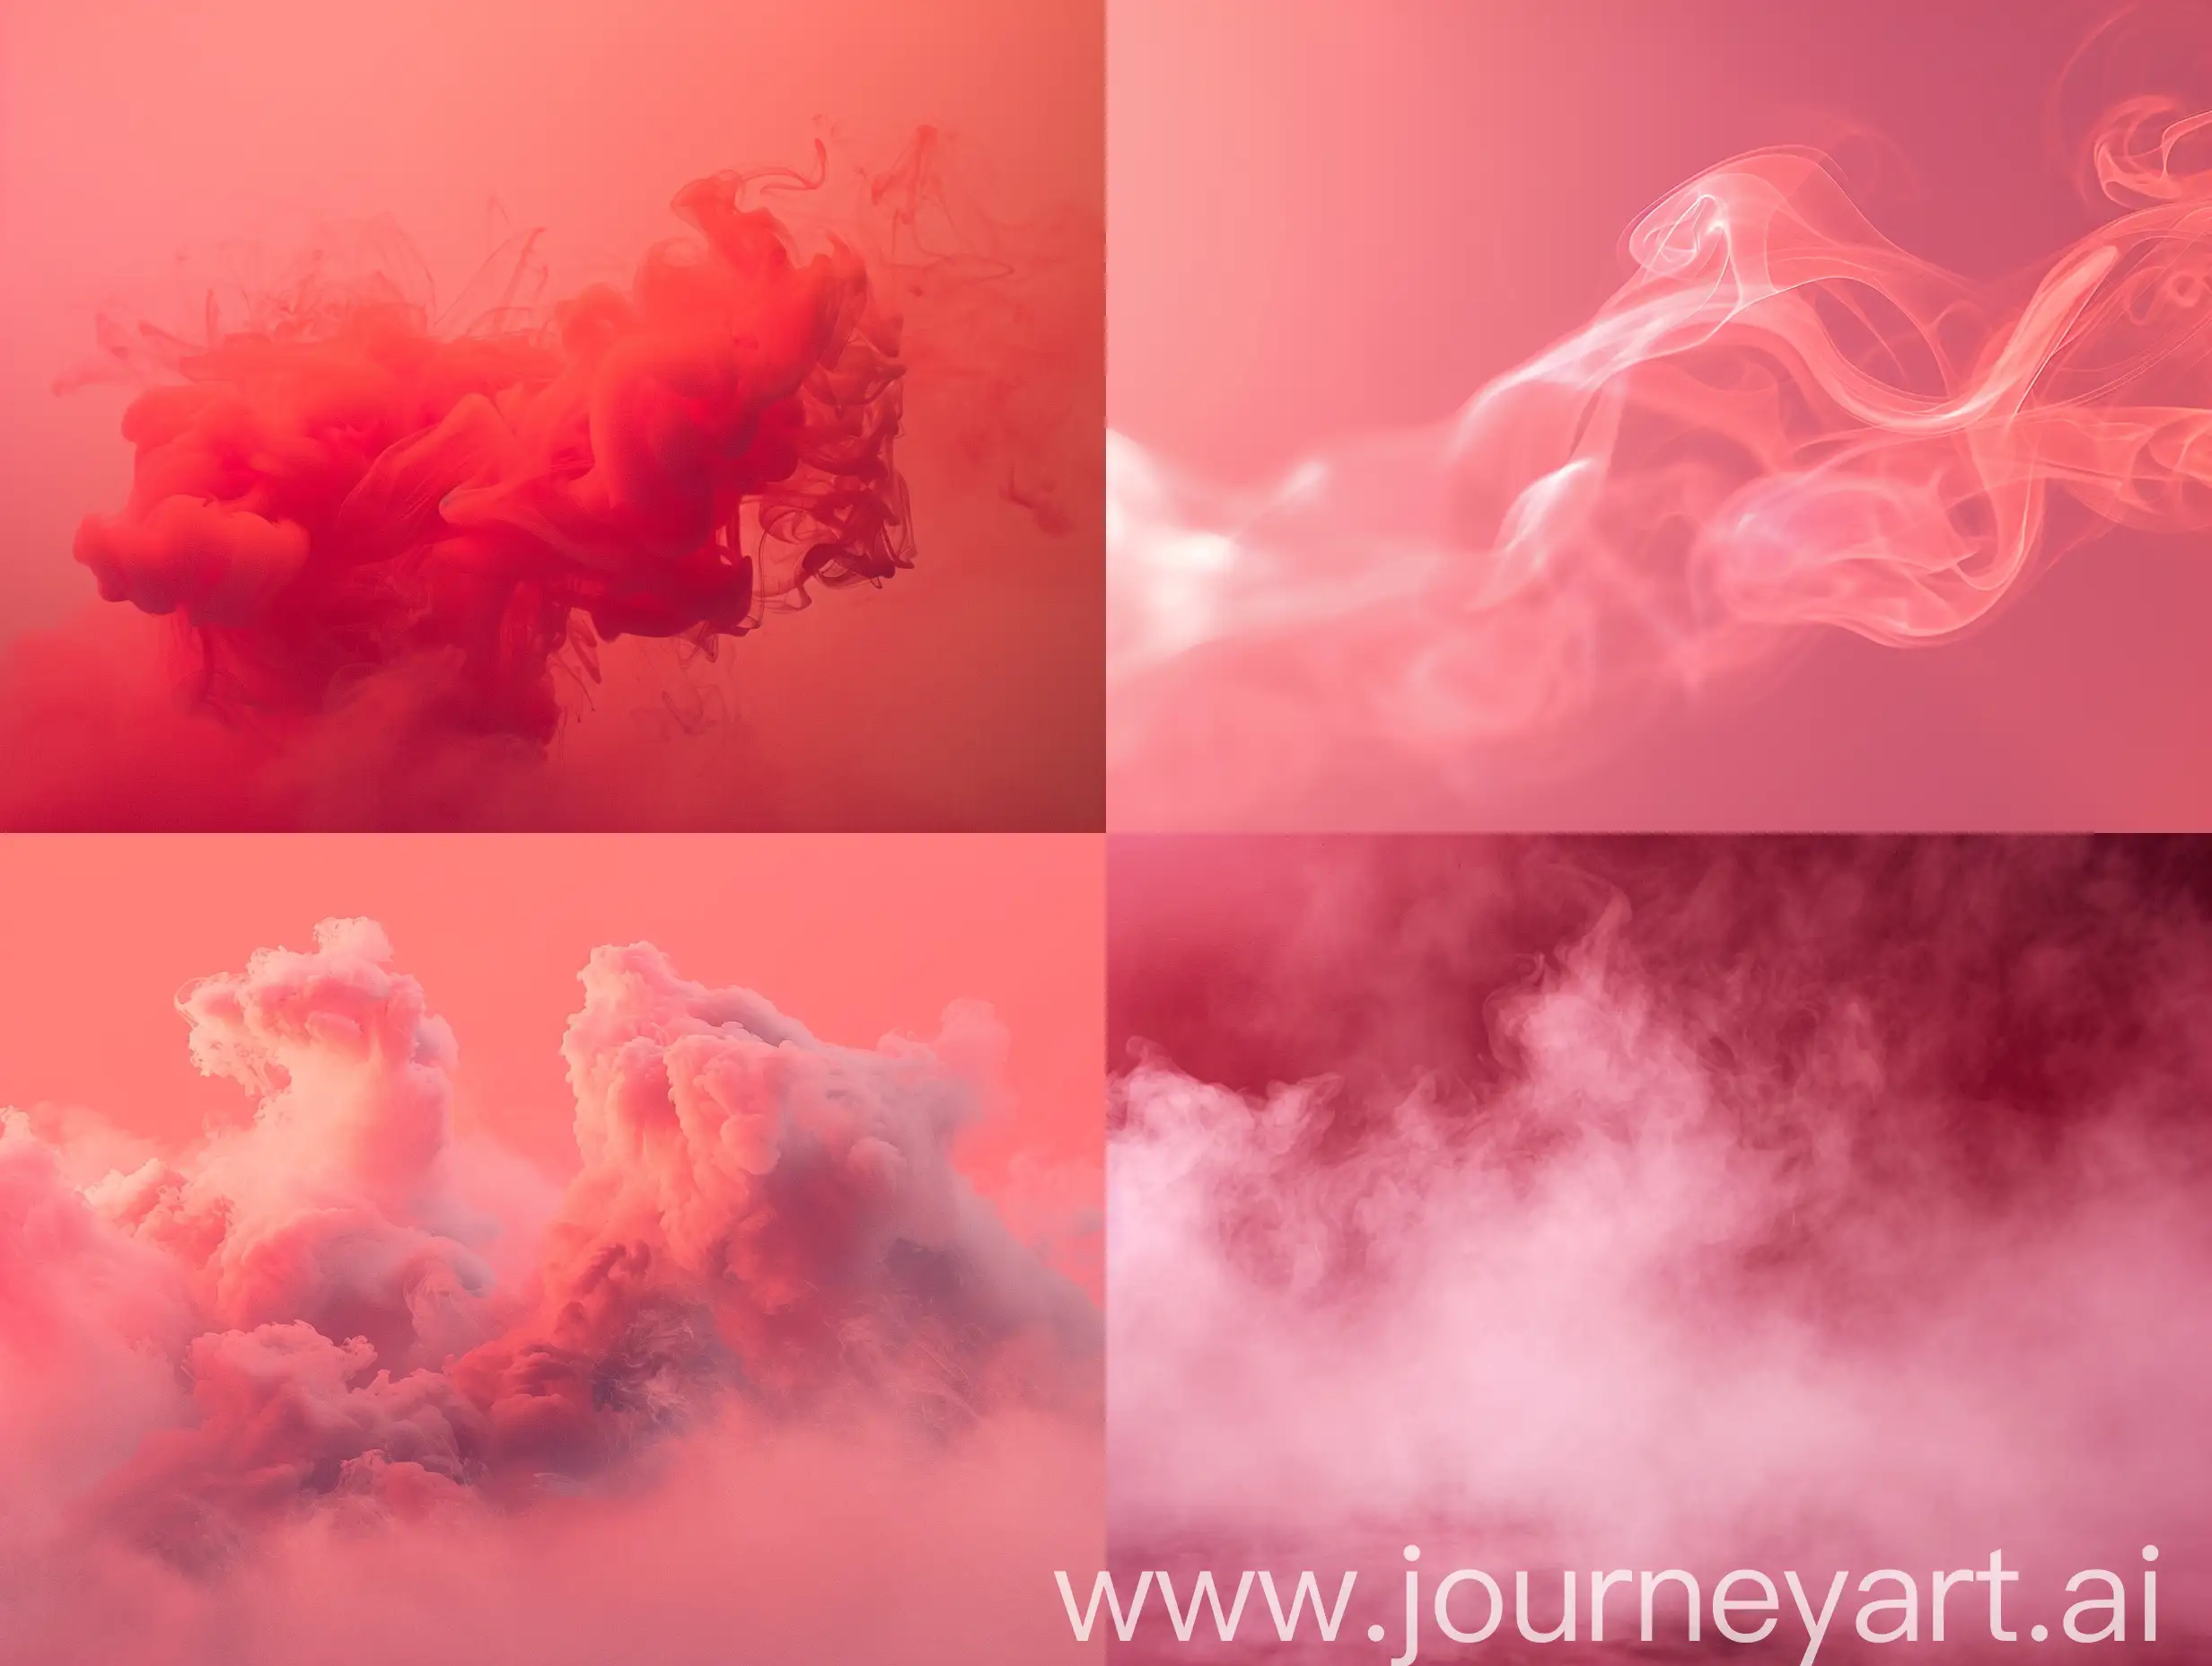 a thick and soft glowing pinkish-red smoke against a pinkish-red background